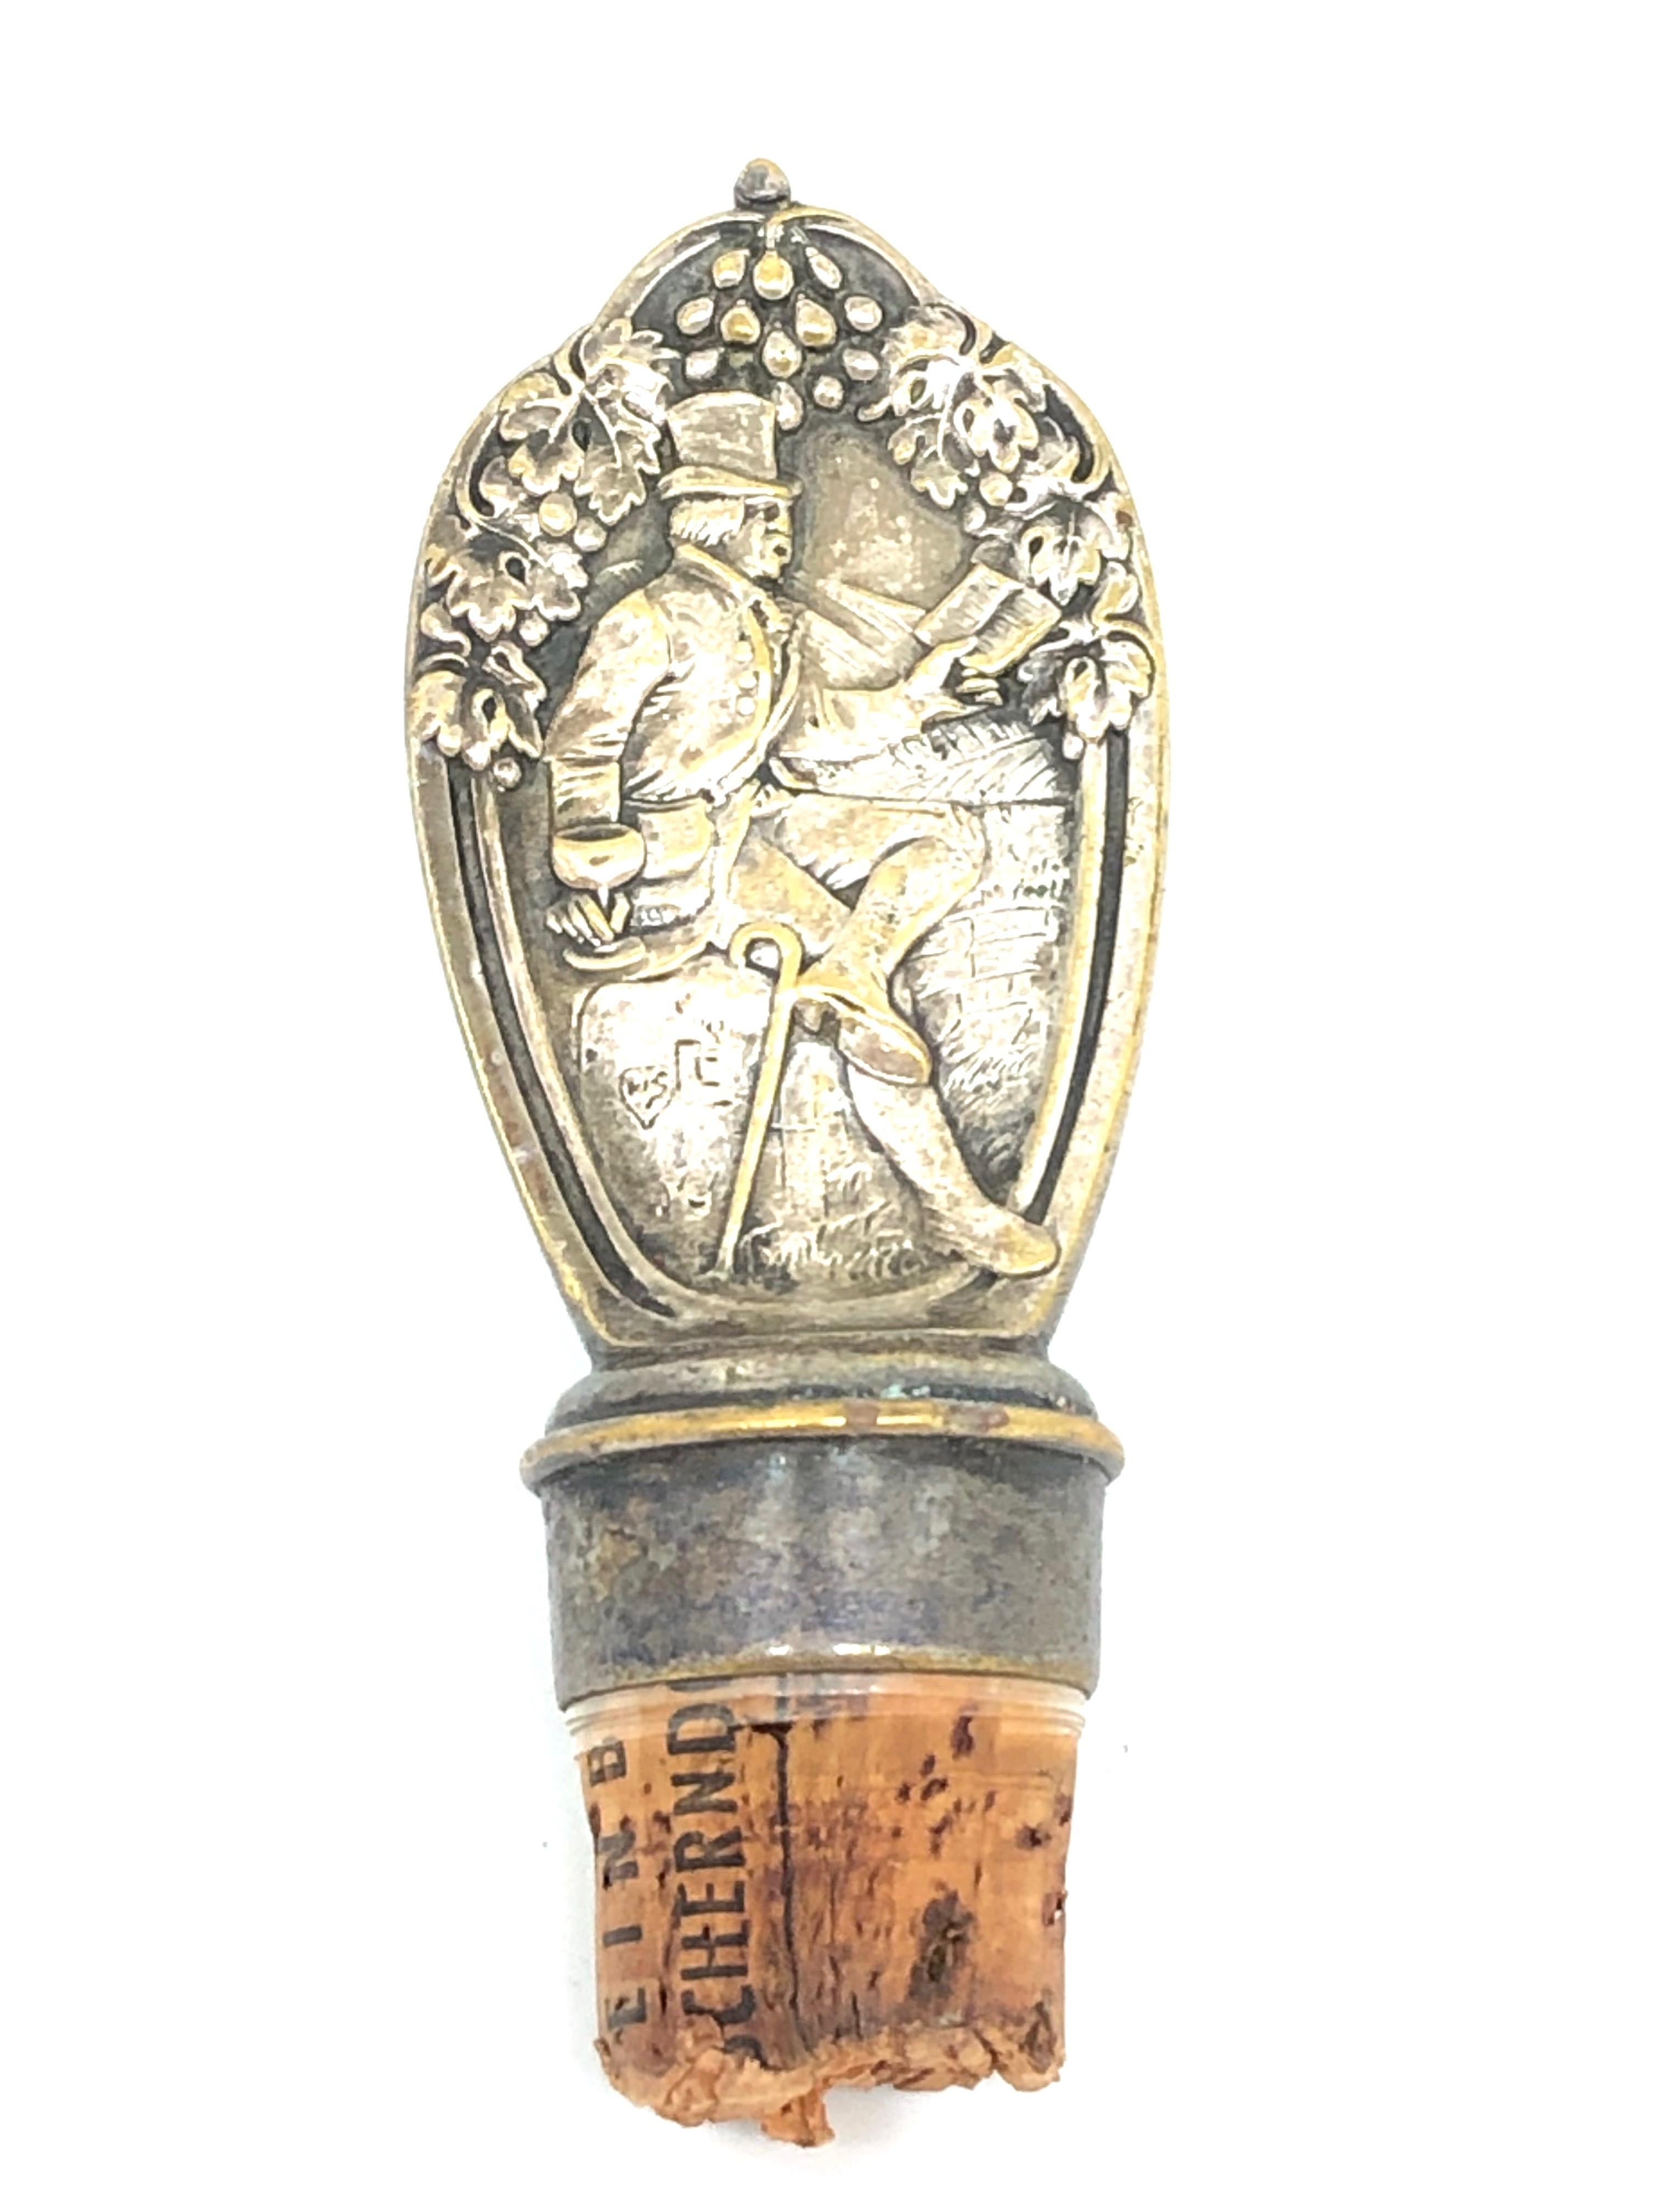 A beautiful metal and cork bottle stopper. Some wear with a nice patina or plating lost, but this is old-age. Made of metal and cork. A beautiful nice Barware item or just a display item in your collections of antique bottle stoppers.

   